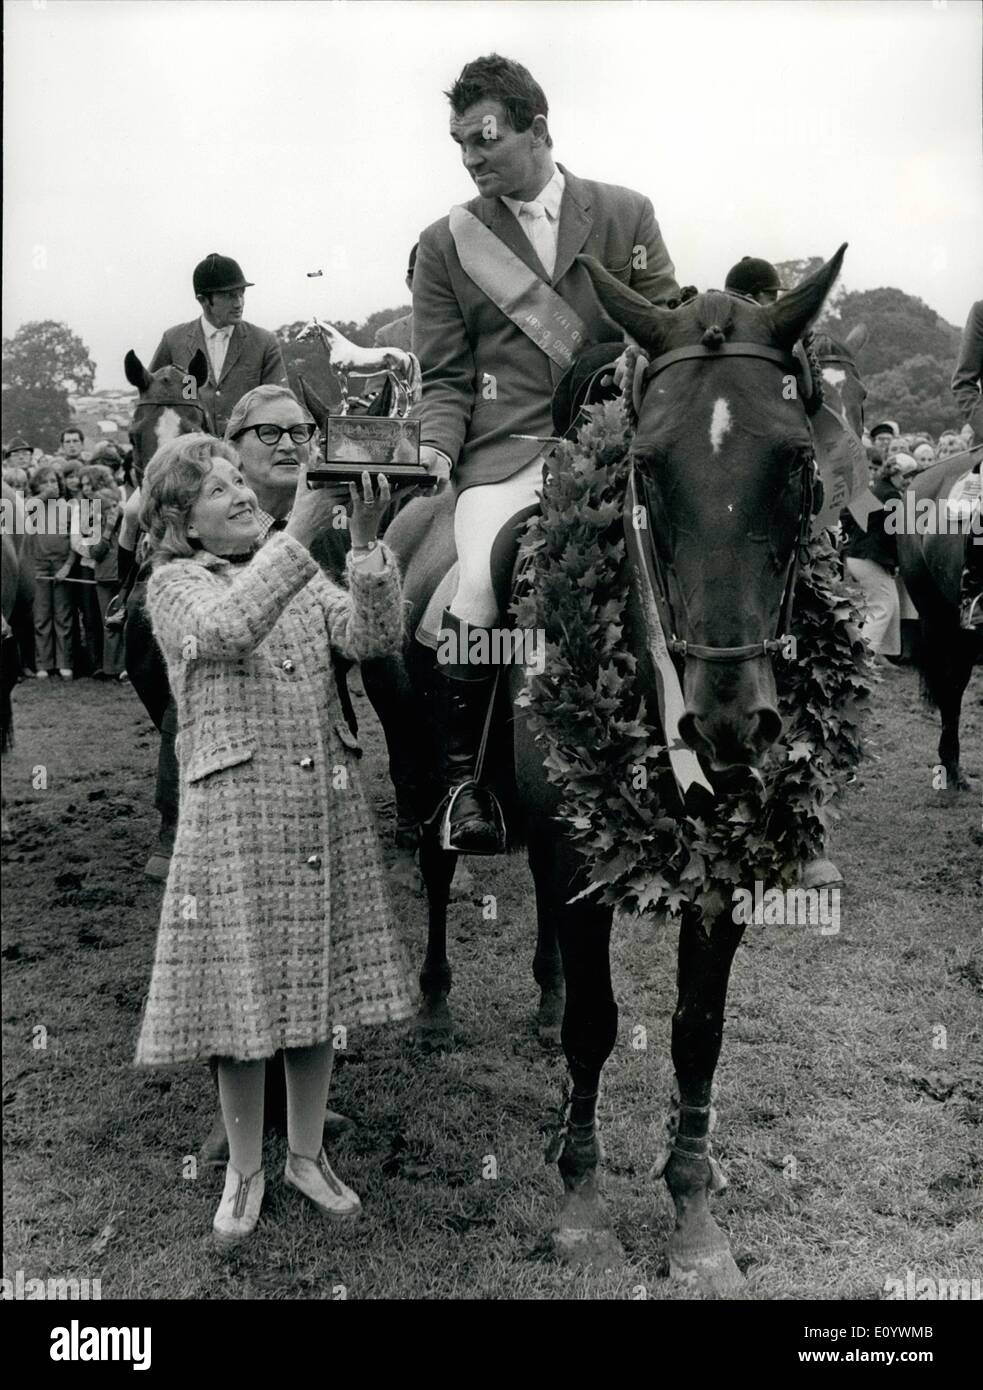 Aug. 08, 1971 - Bunn 'Disqualifies' Harvey Smith Five After British Jumping Derby: Five hours after he had won the British Jumping Derby for the second year running on Mr. B.J. Eastwood's ''Mattie Brown'' at Hickstead yesterday, Harvey Smith was sent a telegram saying that he had been disqualified, and the the 000 first prize, a world record, had been forfeit. Smith An Mattie Brown had th better of a two-horse jump-off in this classic with Stephen Hadley on Propero who, if the disqualification is upheld, will presumably be declared the winner Stock Photo